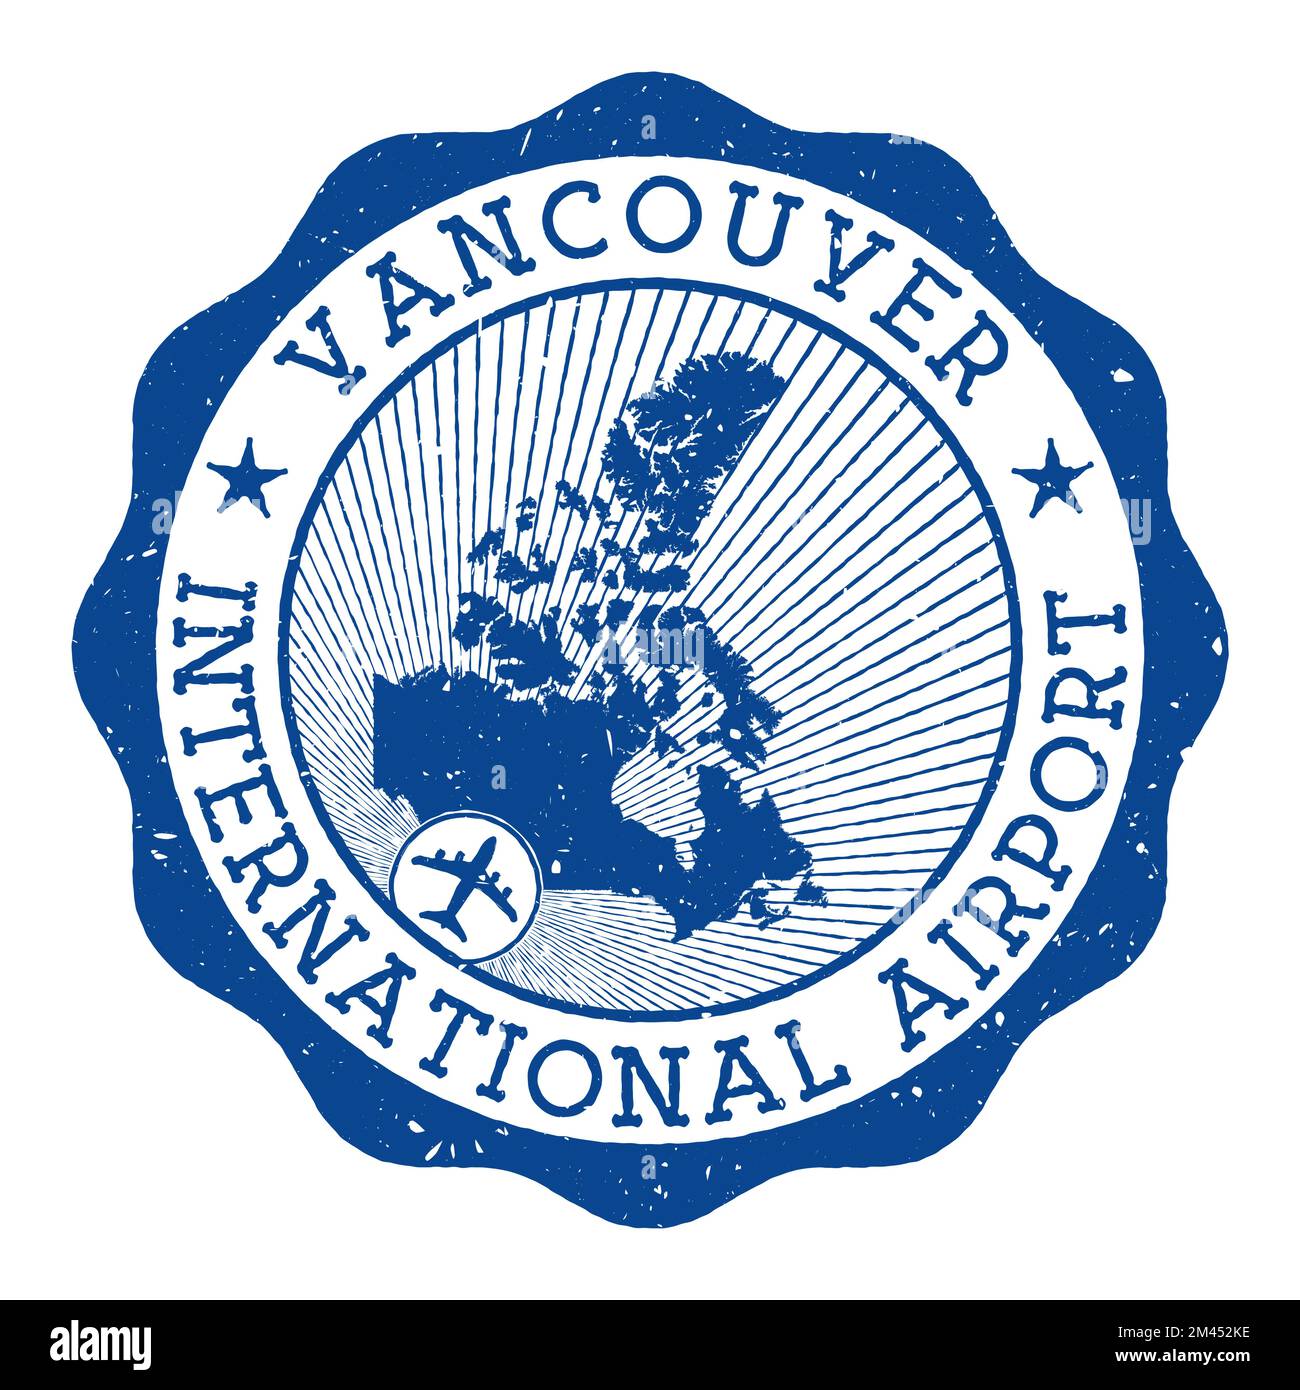 Vancouver International Airport stamp. Airport of Vancouver round logo with location on Canada map marked by airplane. Vector illustration. Stock Vector